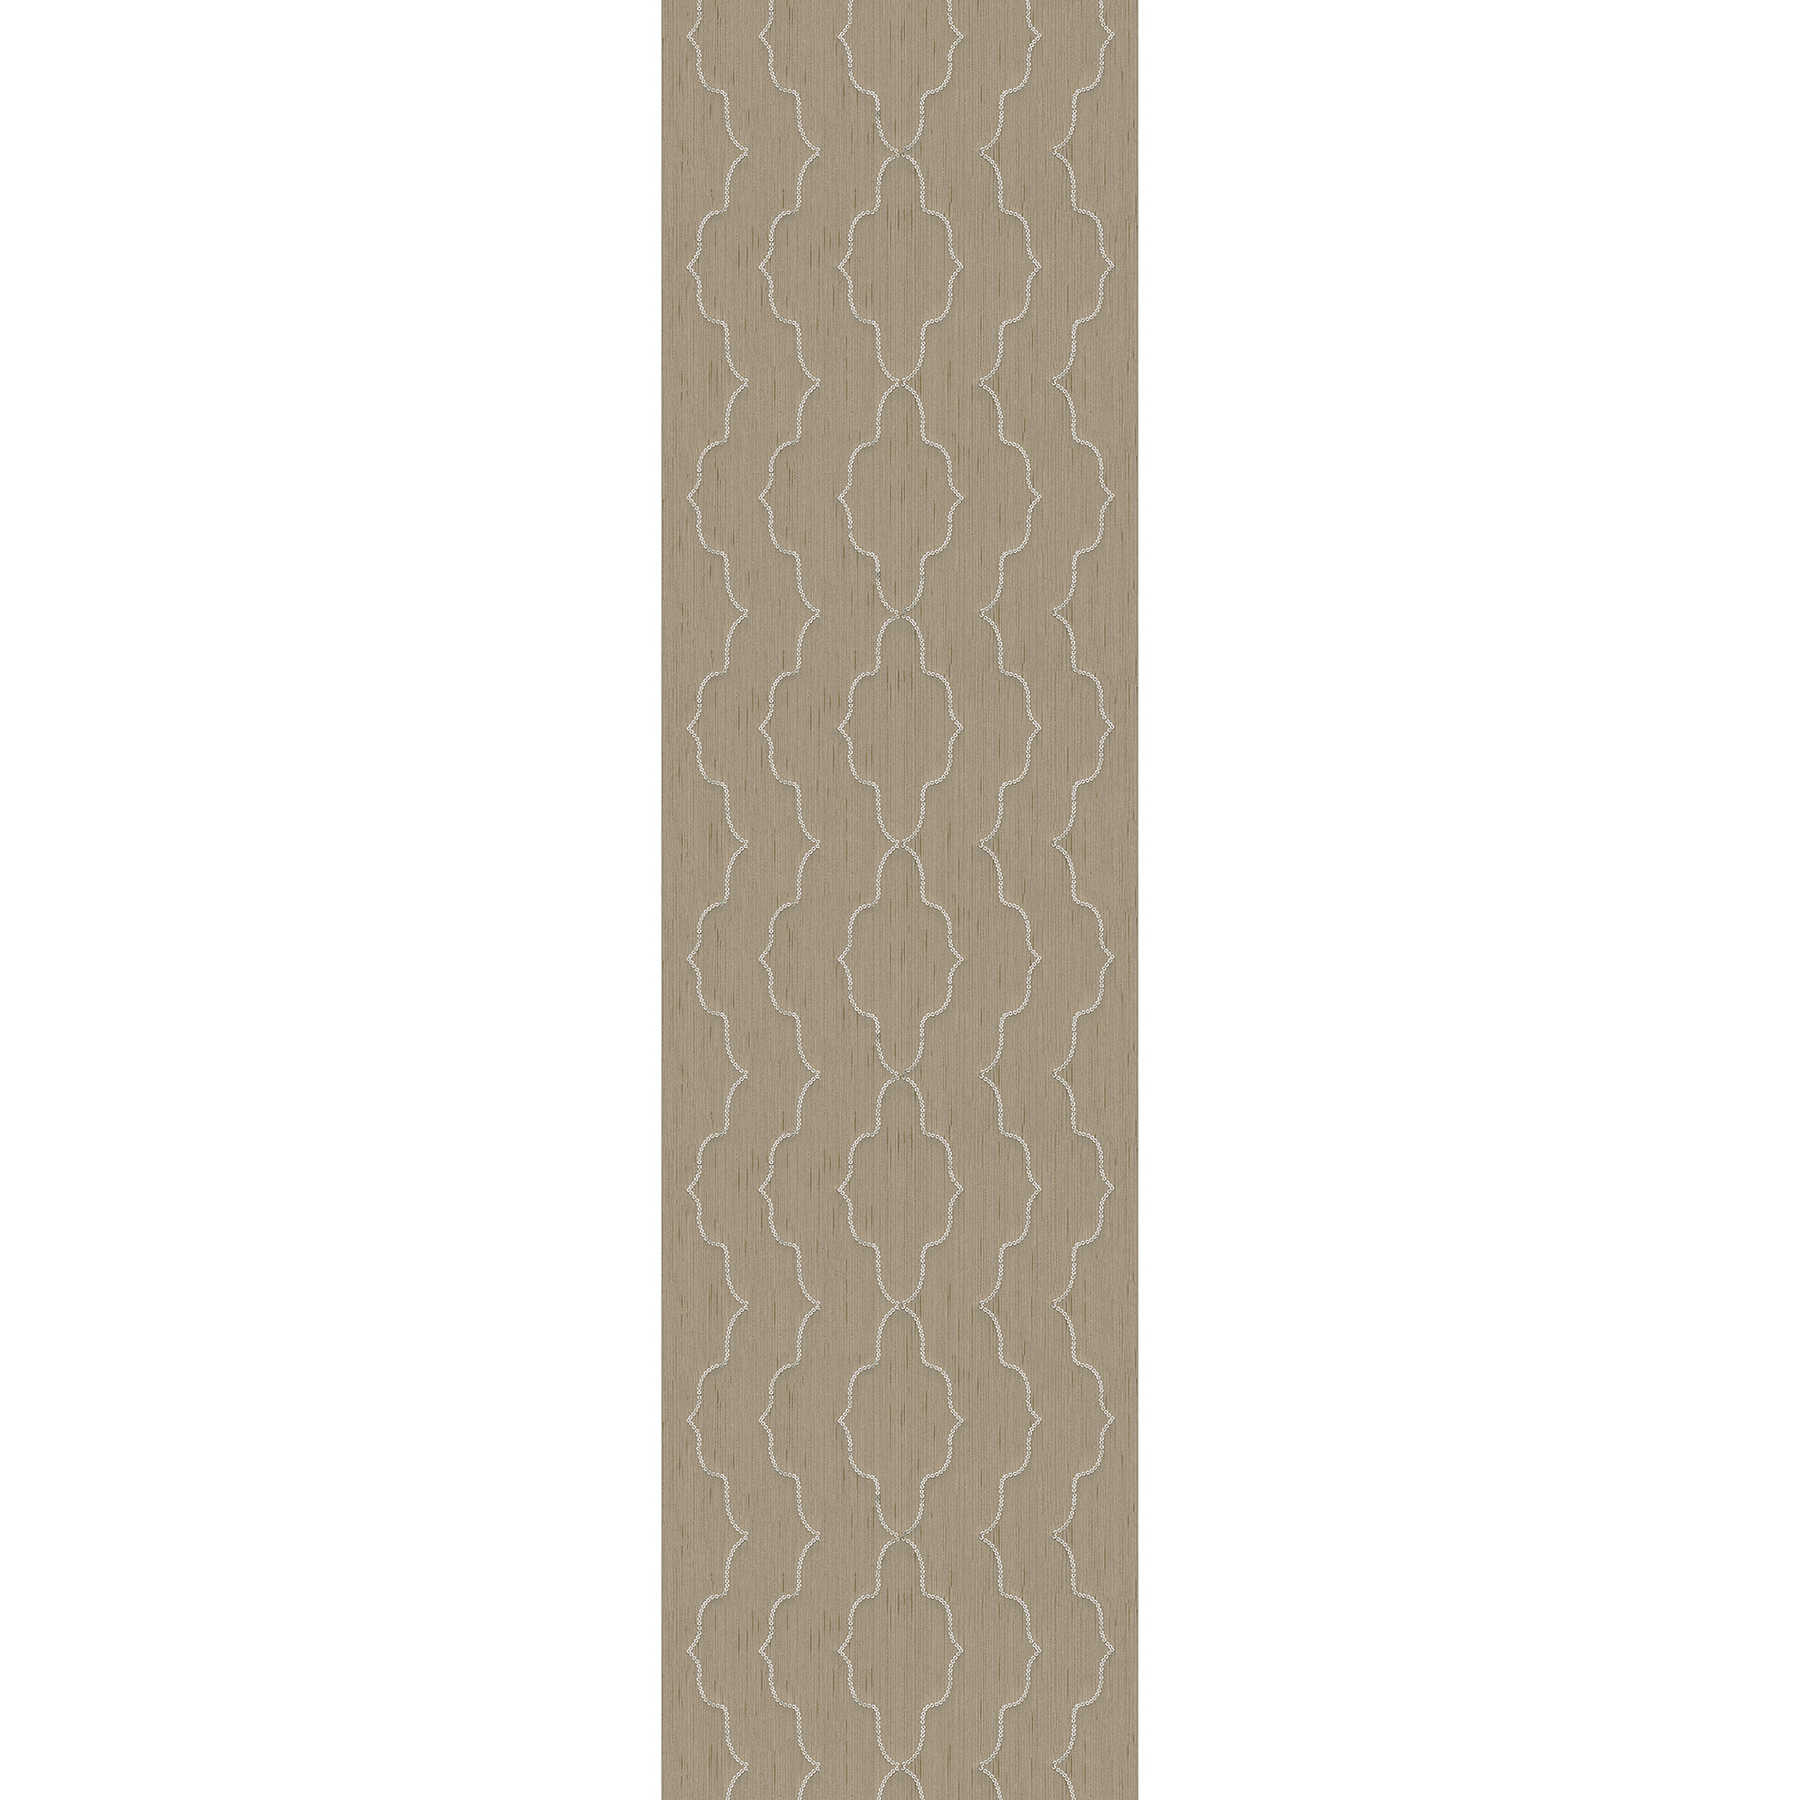         Graphic wallpaper with sequins & metallic effect - brown, silver
    